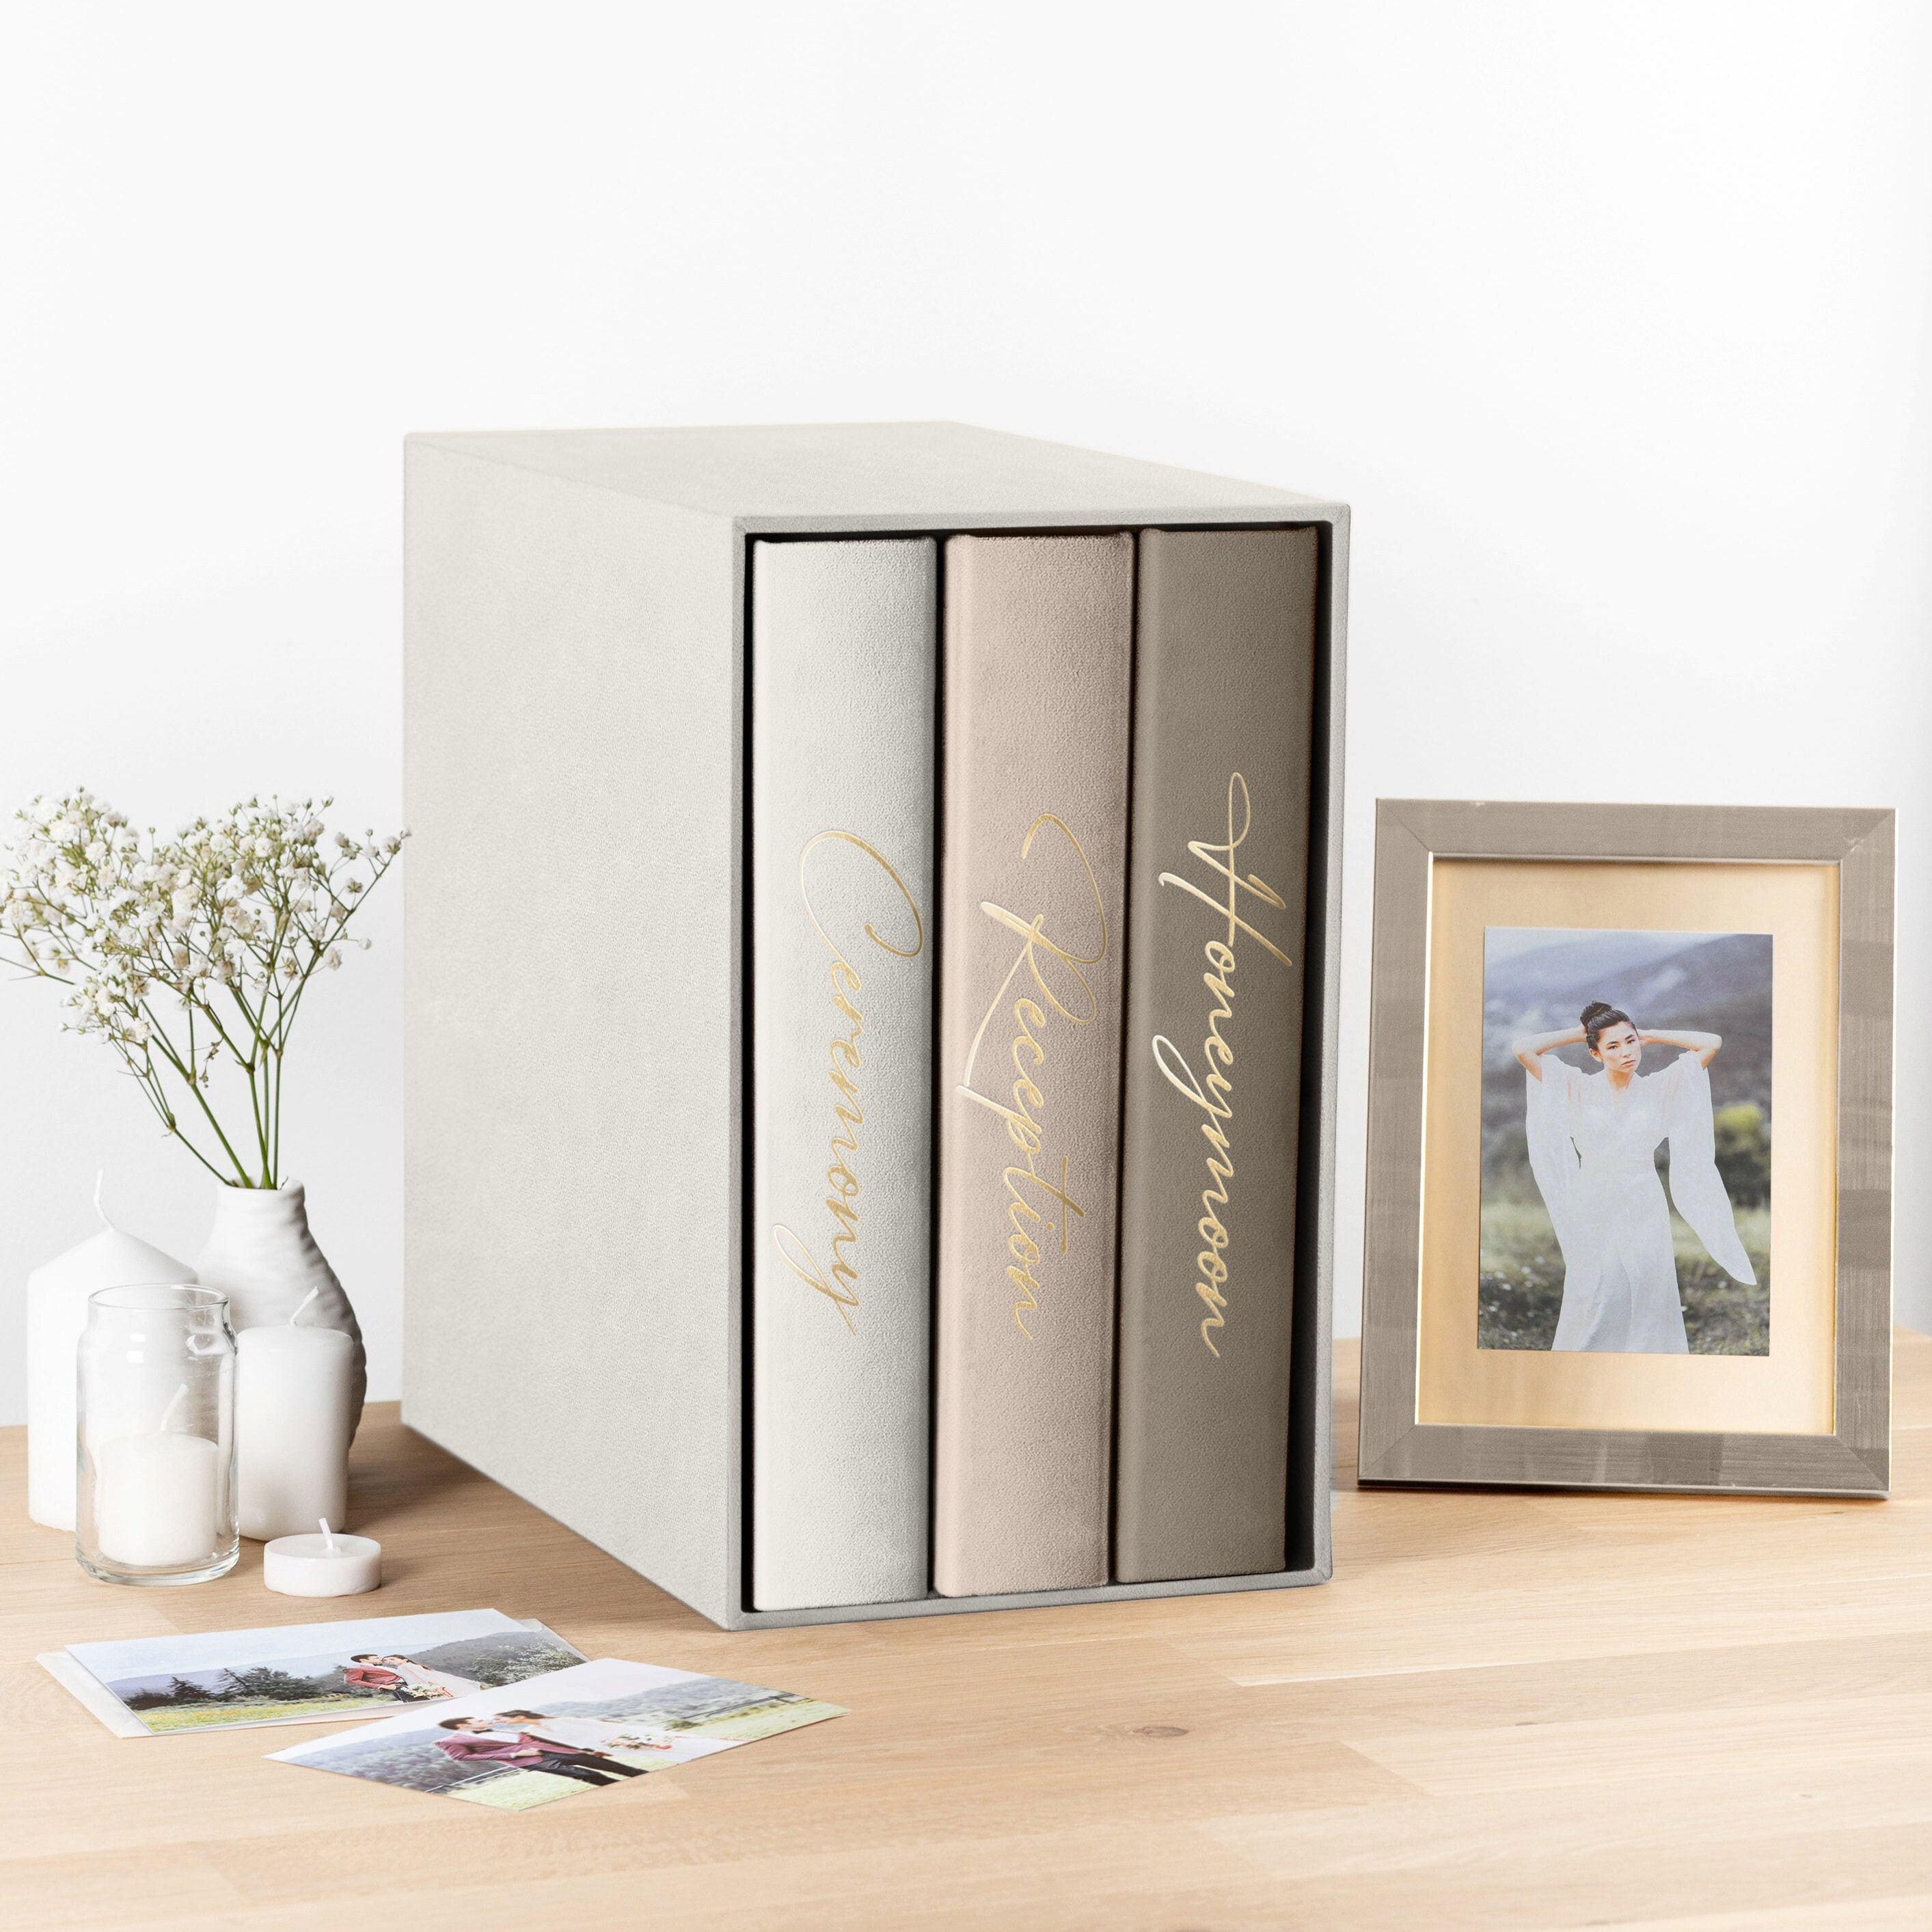 2 Self Adhesive Photo Albums Slipcase Two Personalized Wedding Self-adhesive  Albums With Photo Window Slipcase Hand Made in Europe 